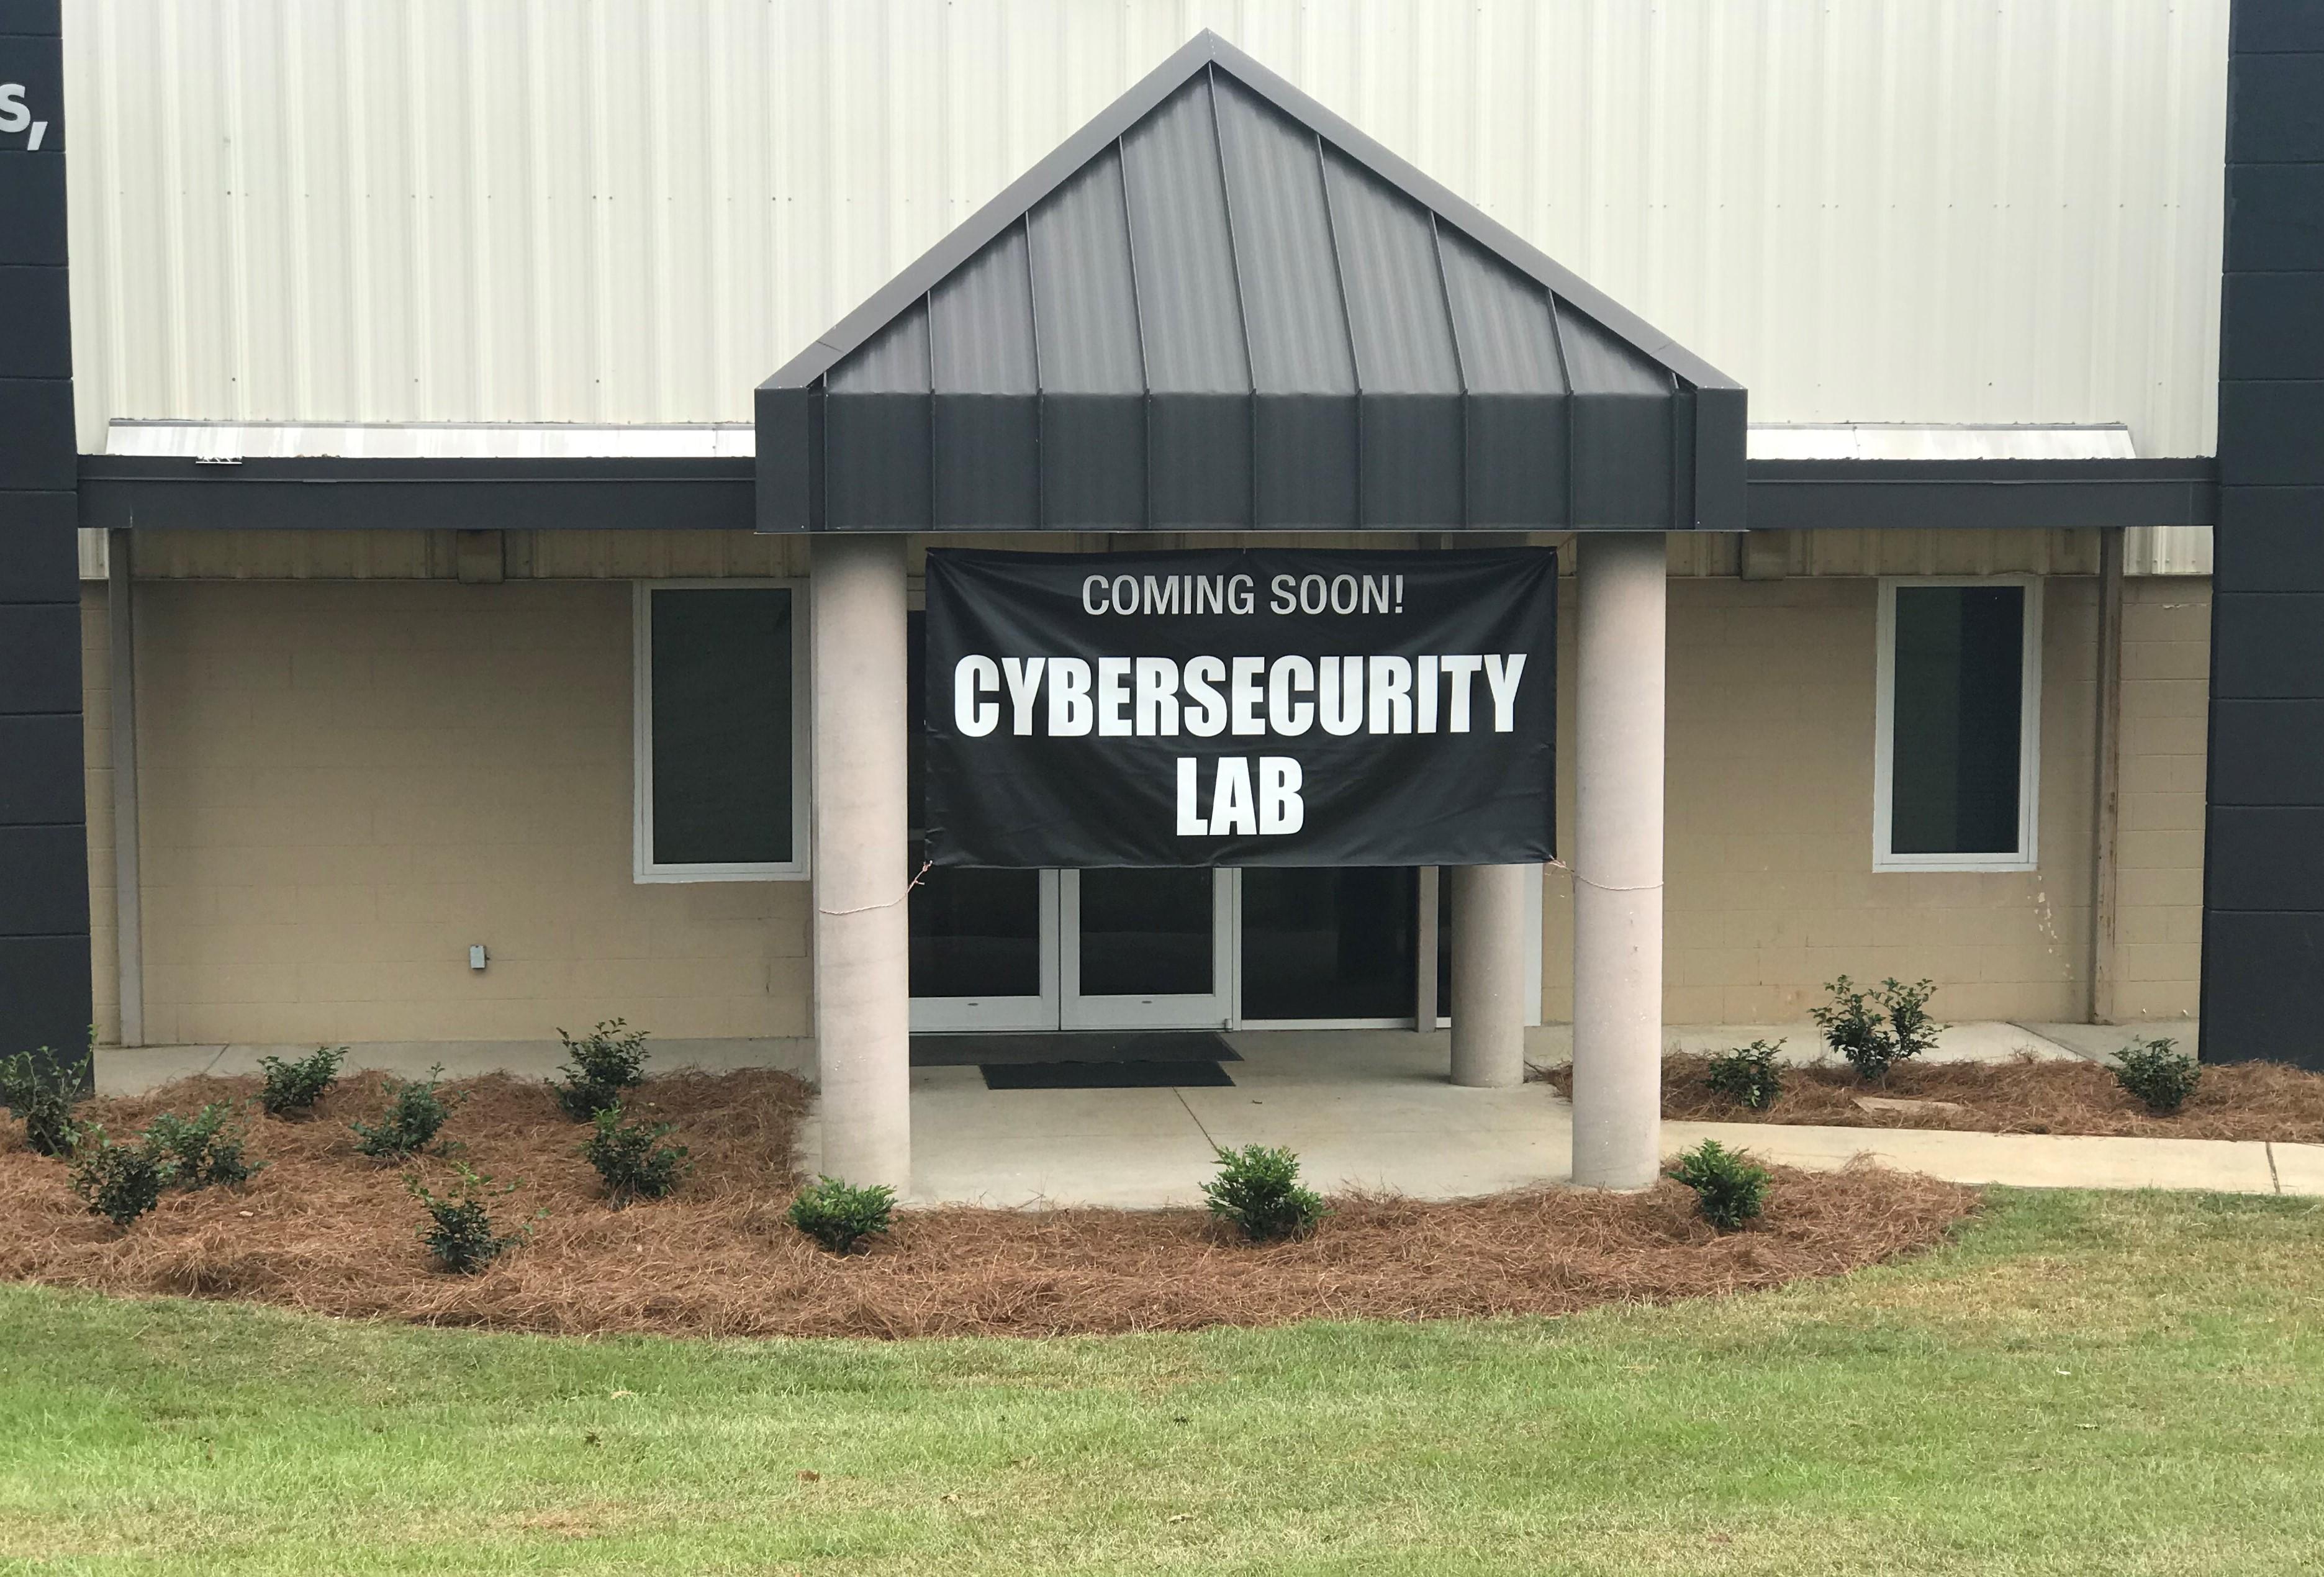 The outside entrance to CSI Cyber Security Lab